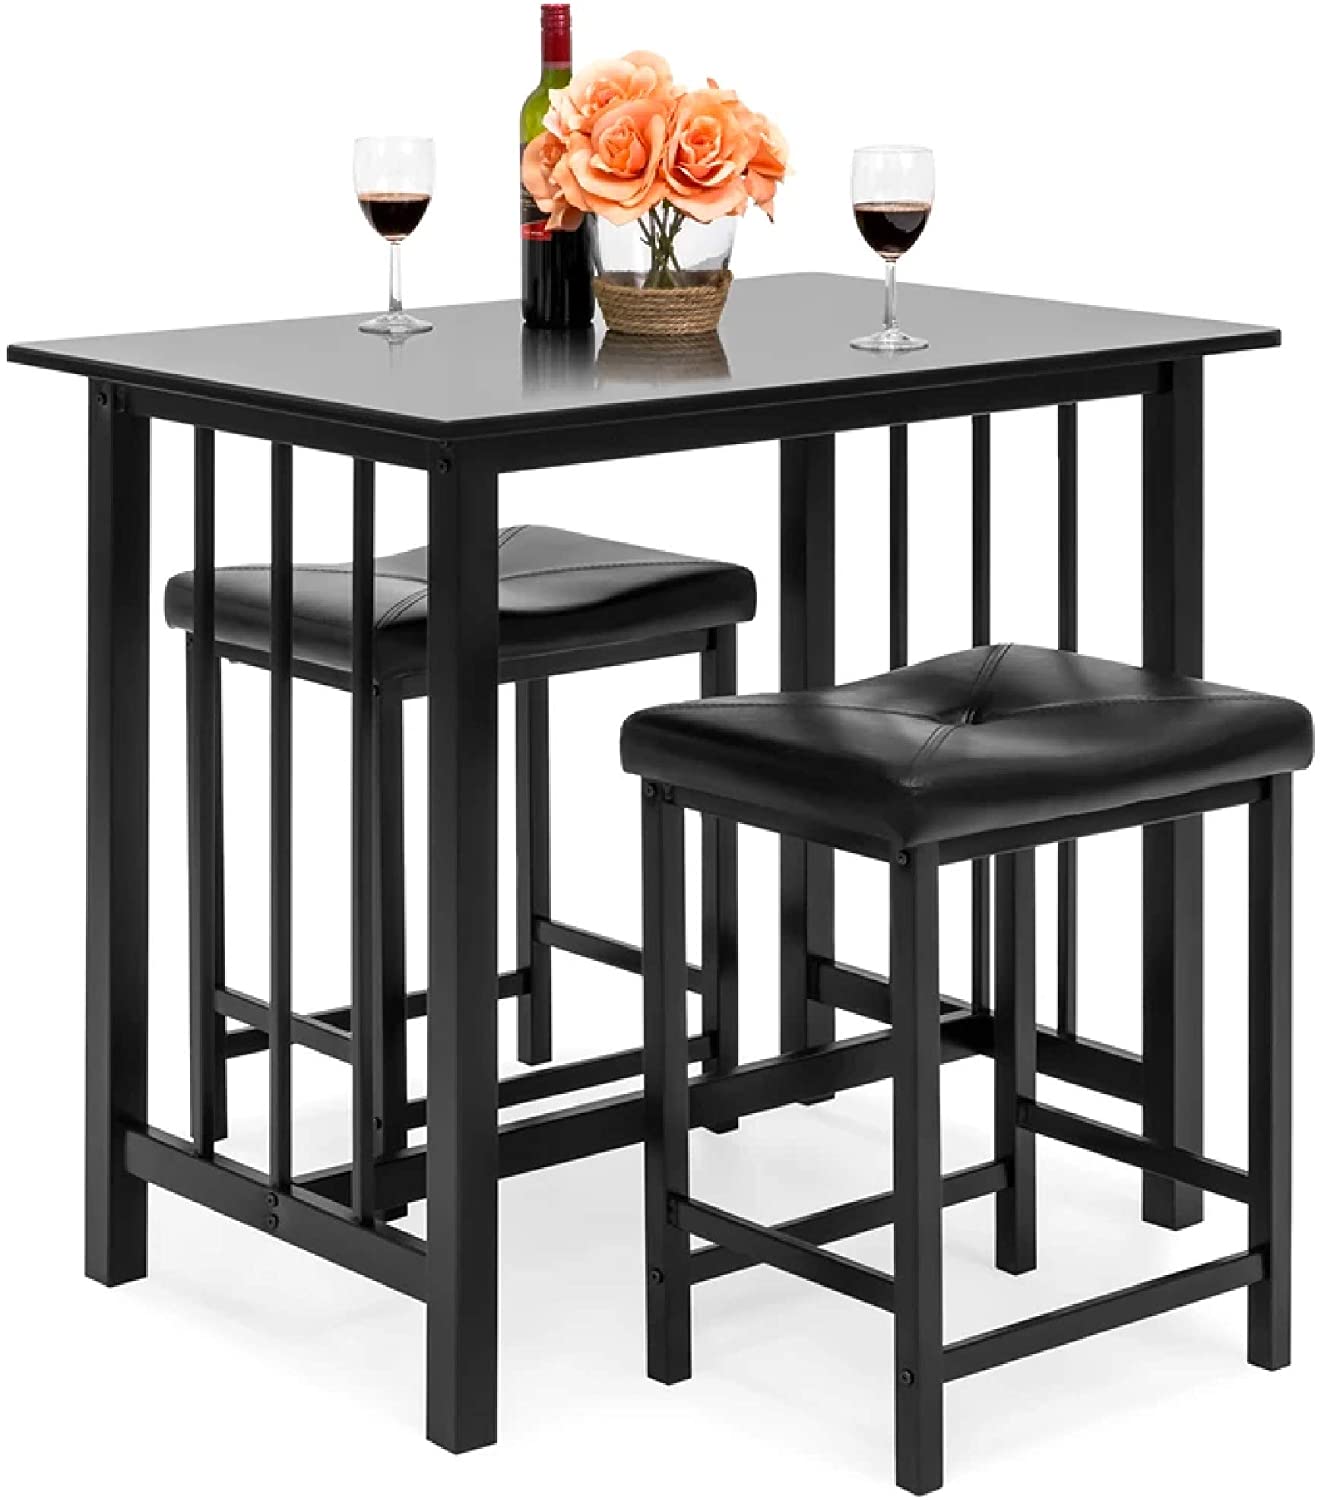 Hot Selling 3-piece Counter Height Dining Table Furniture Set For Kitchen Bar Bonus Room Space-saving Design